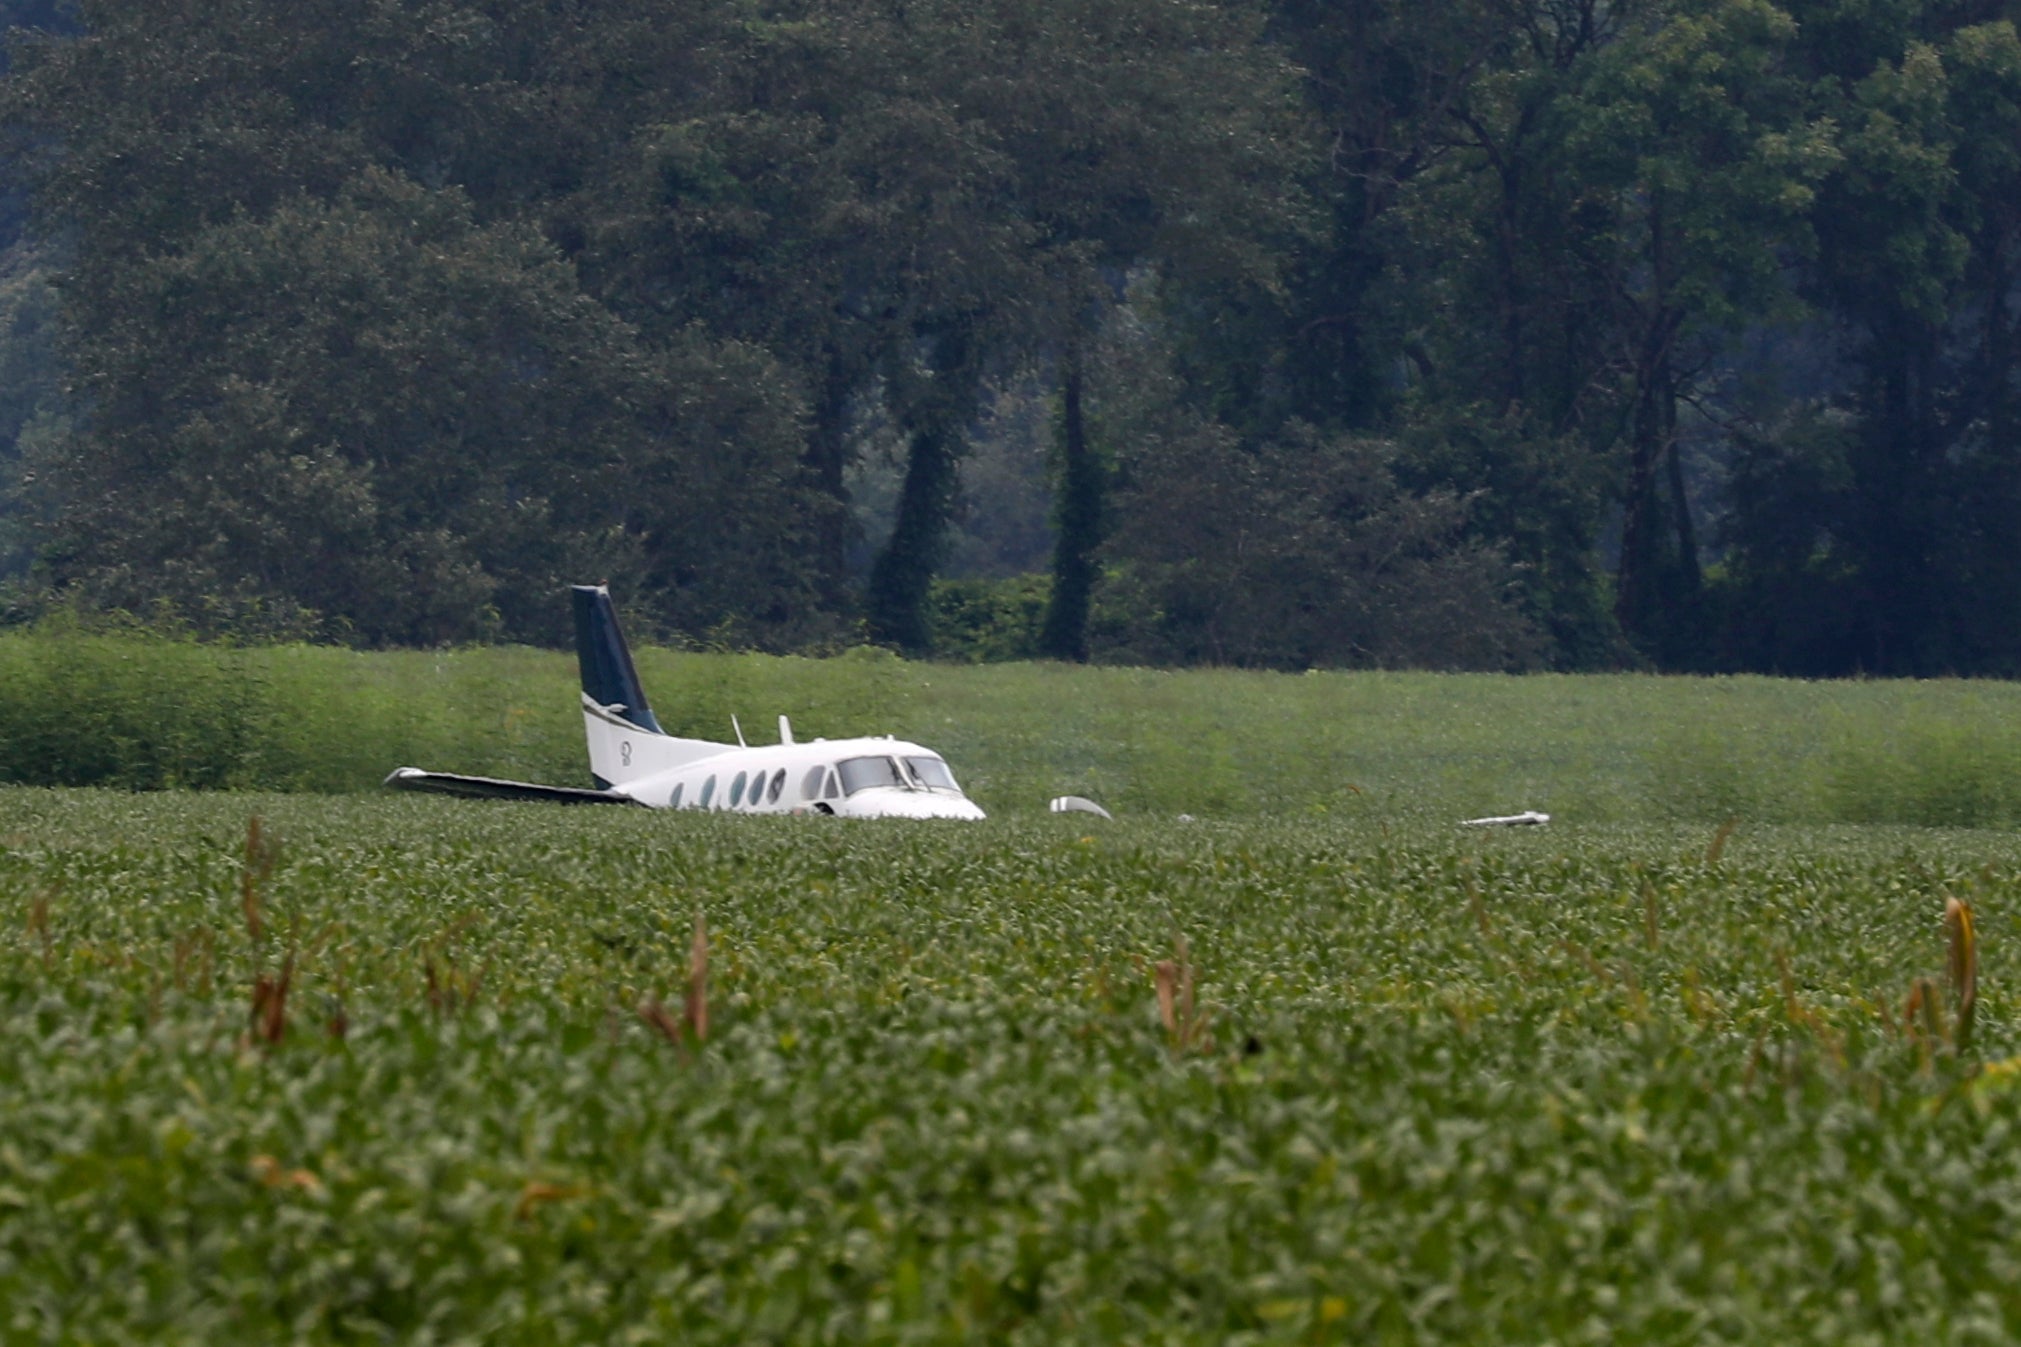 Pilot who threatened to crash intentionally in Mississippi had no